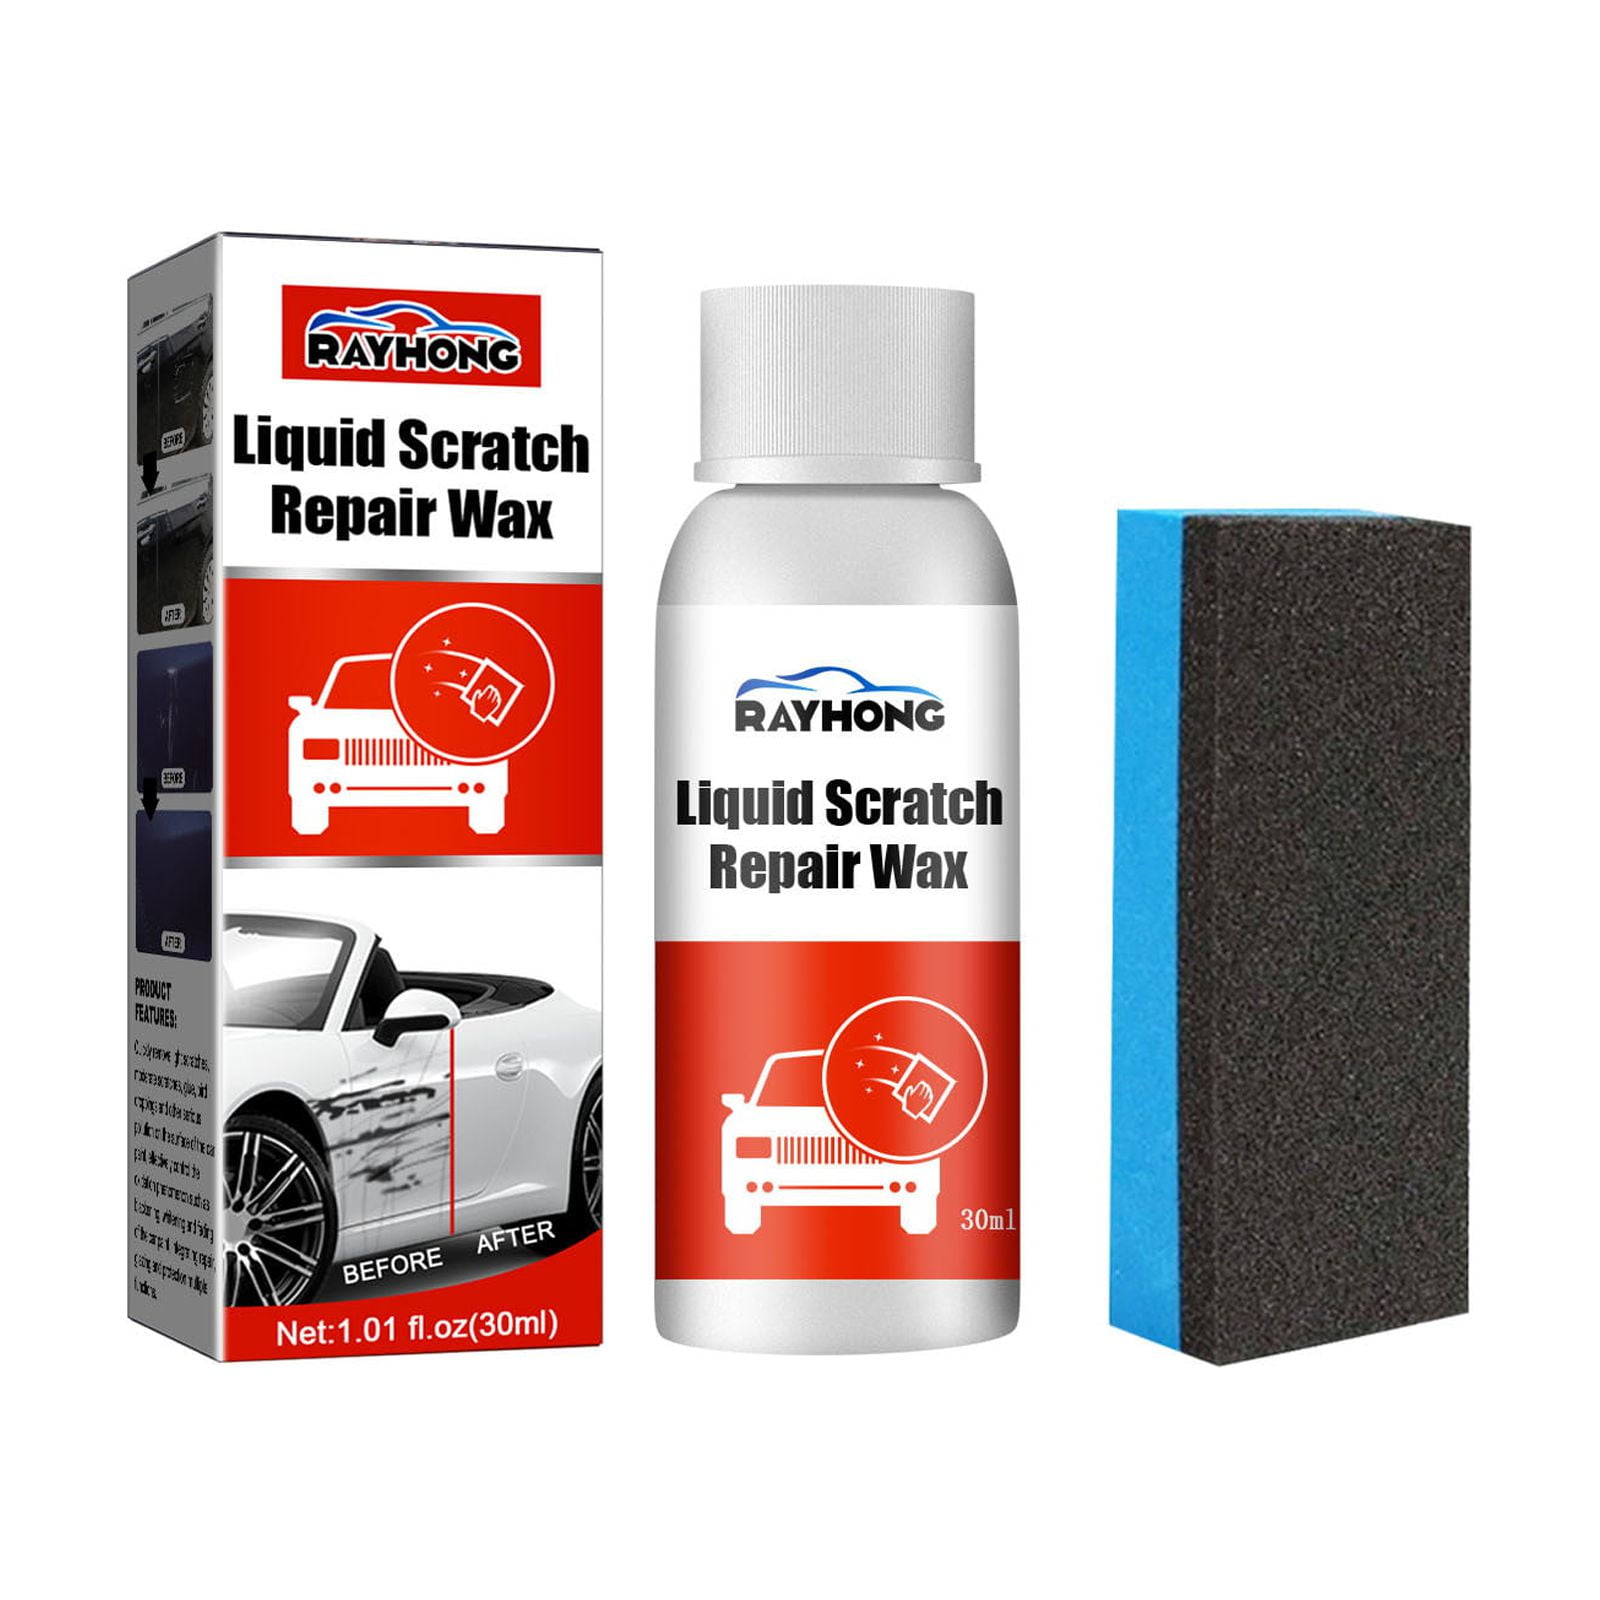 3D One Car Scratch & Swirl Remover - Rubbing Compound & Finishing Polish